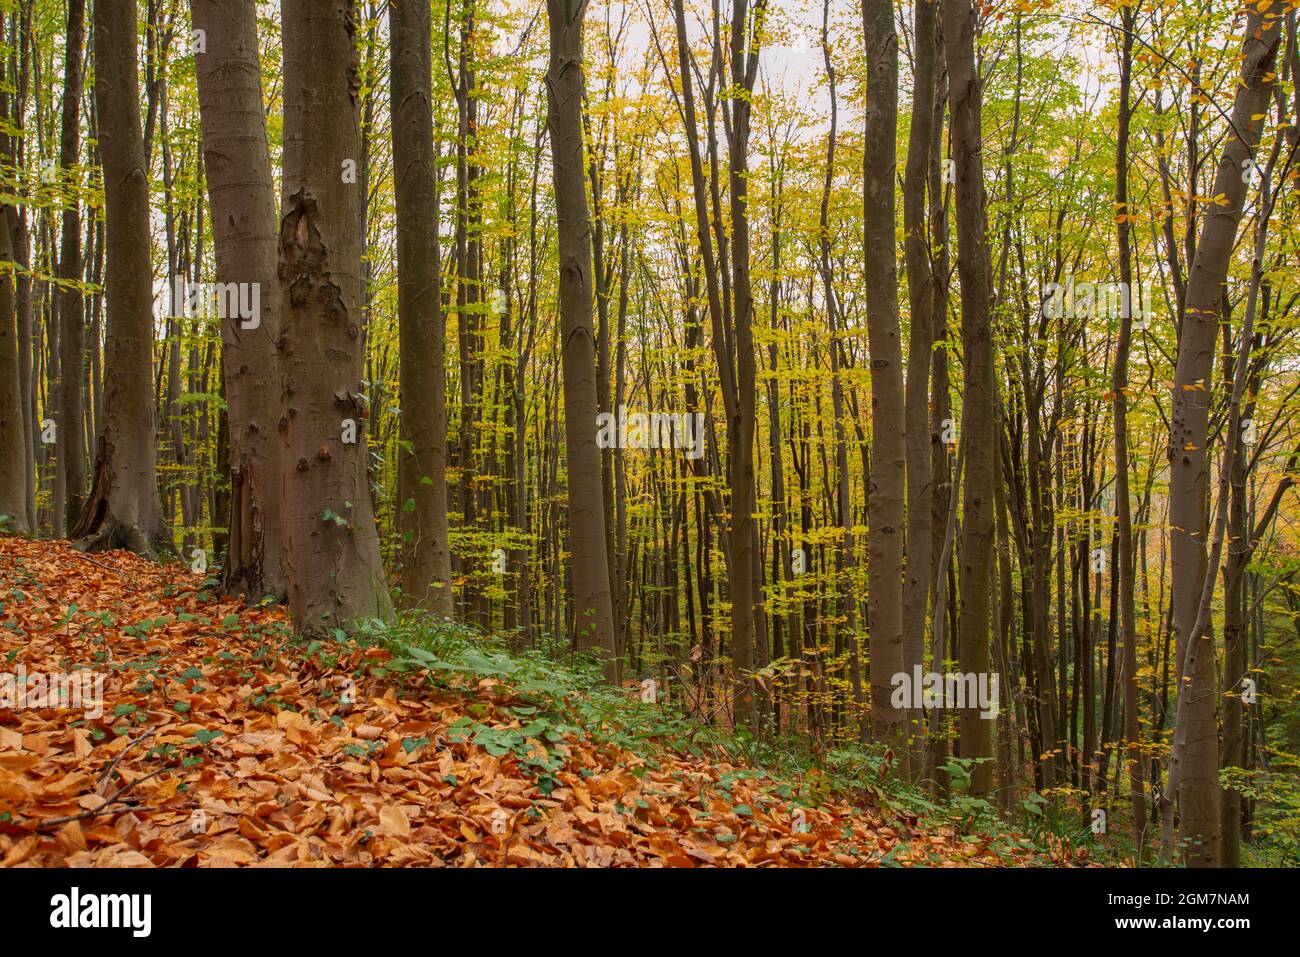 Beautiful beech forest in autumn with the ground covered by a blanket of leaves Stock Photo